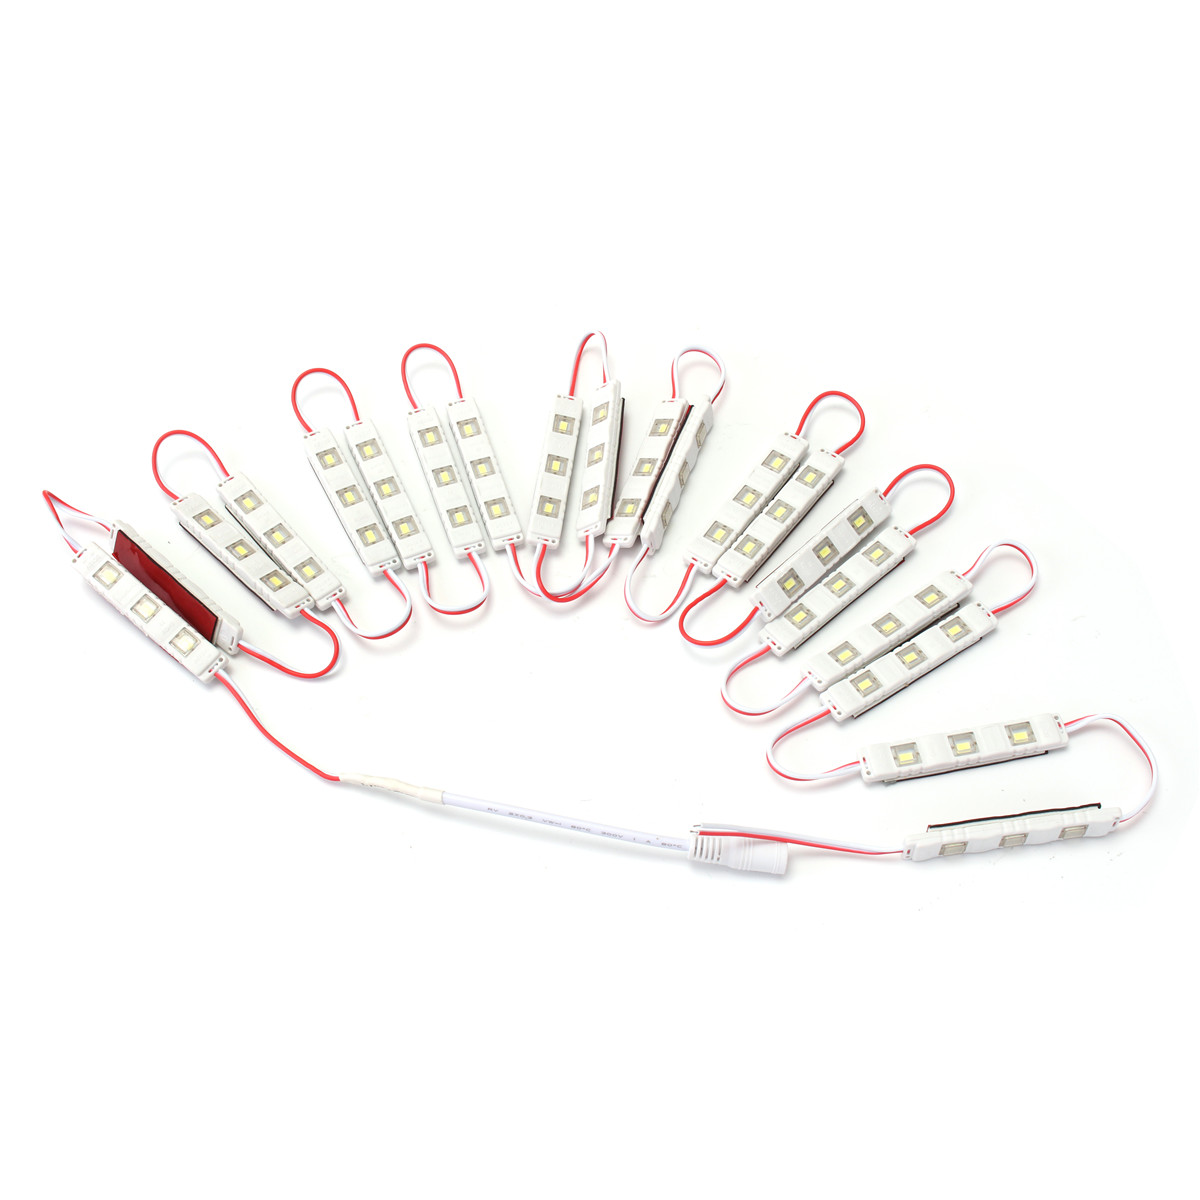 Dimmable-Waterproof-12W-SMD5630-60-LED-Module-Strip-Under-Cabinet-Mirror-Light-Kit-AC110-240V-1292566-4